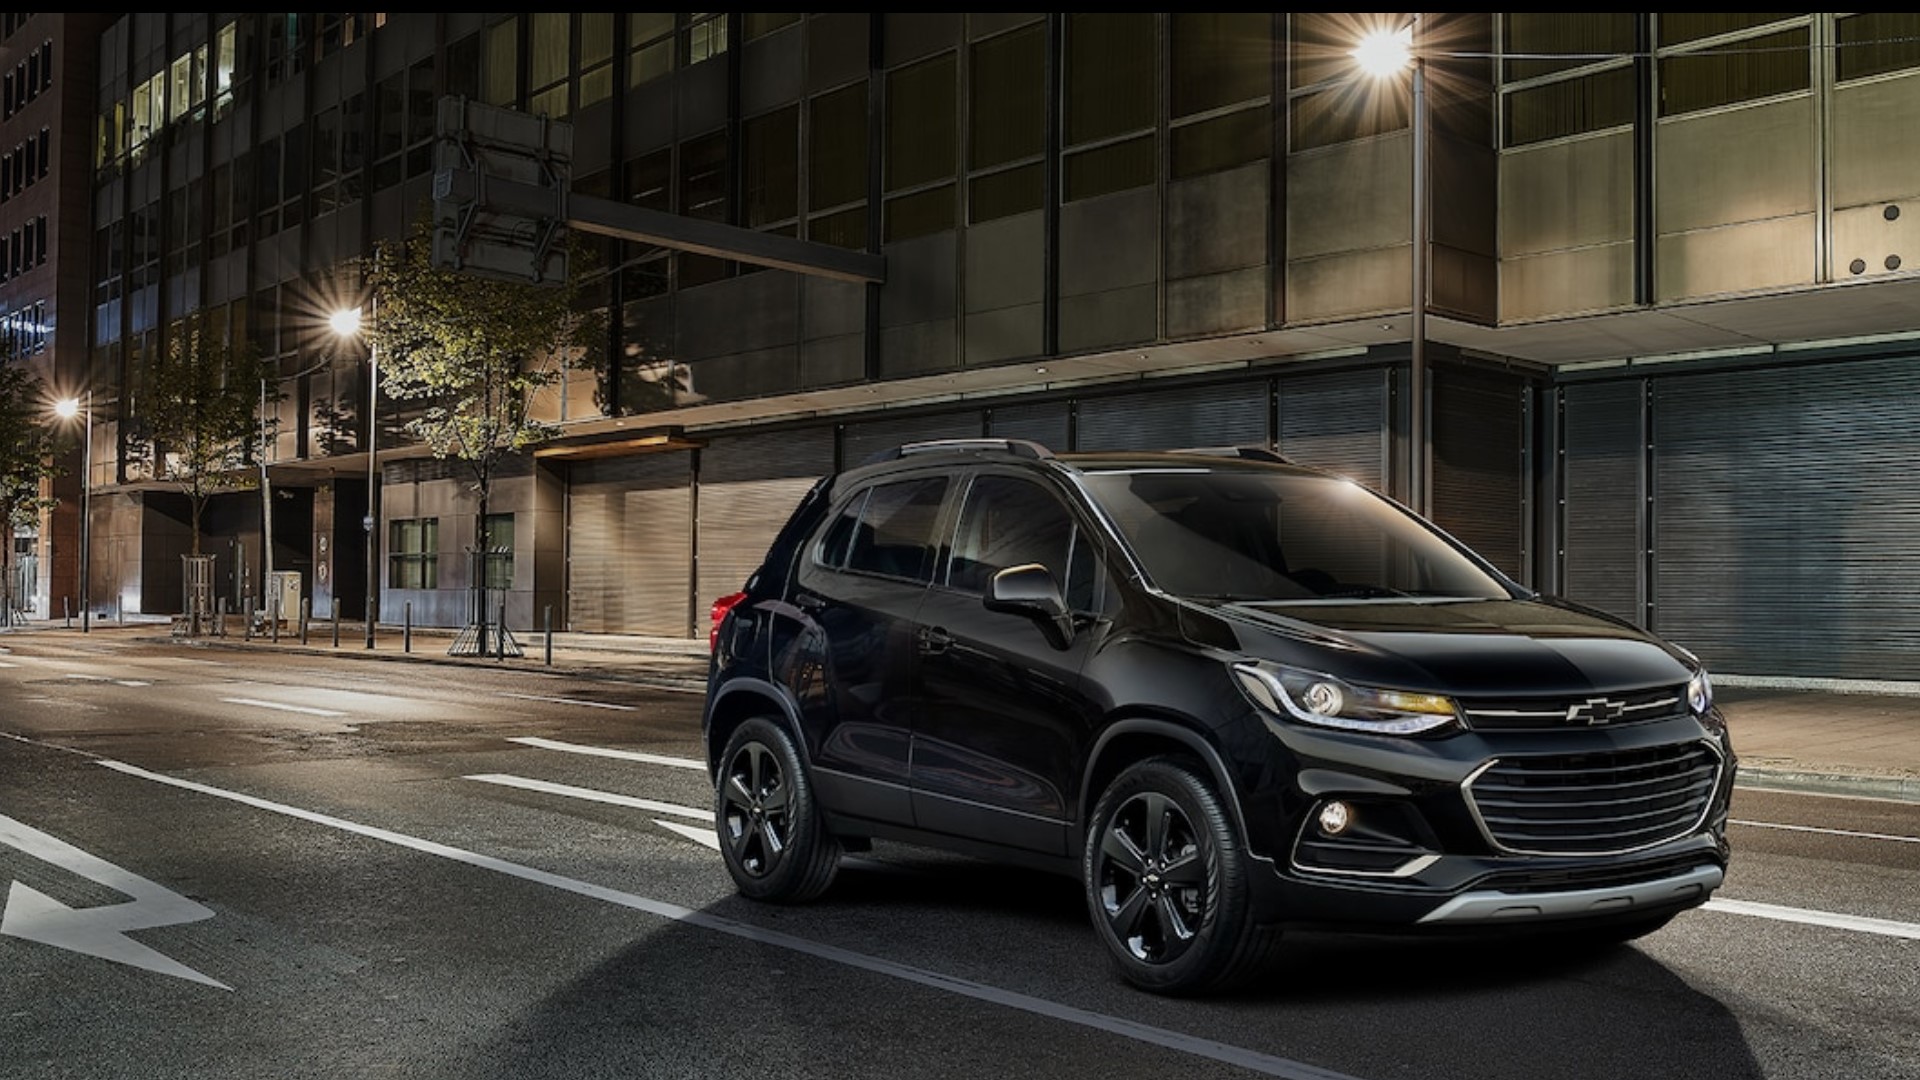 Chevrolet recalls nearly 113,000 Trax for faulty suspension that could lead to crash